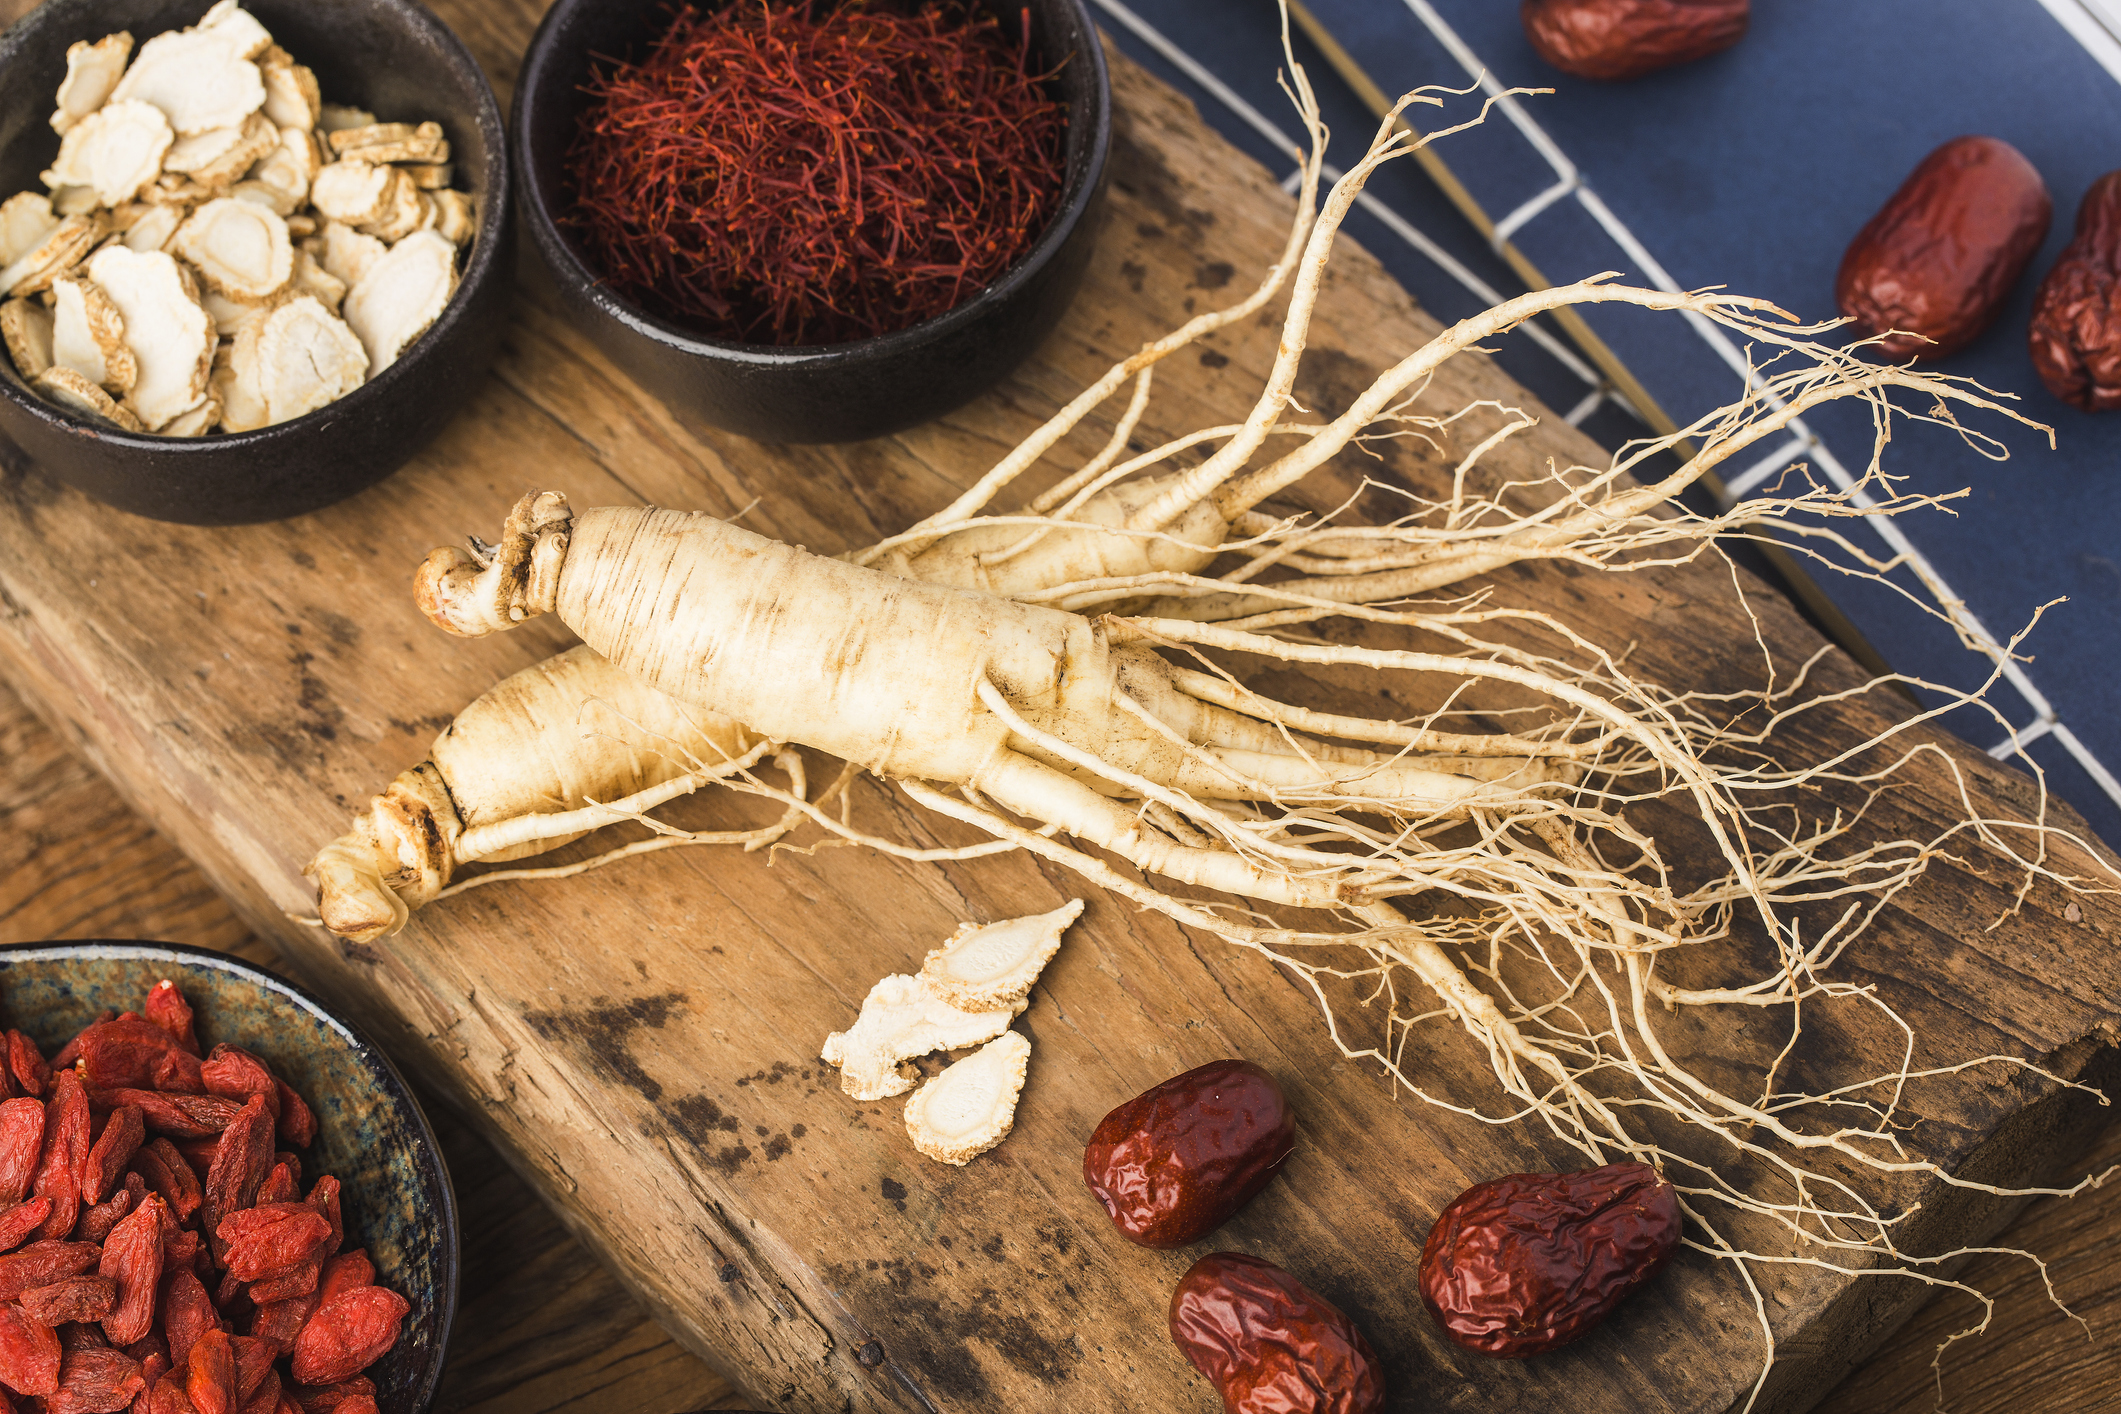 Red ginseng helps slow aging, boost energy after menopause